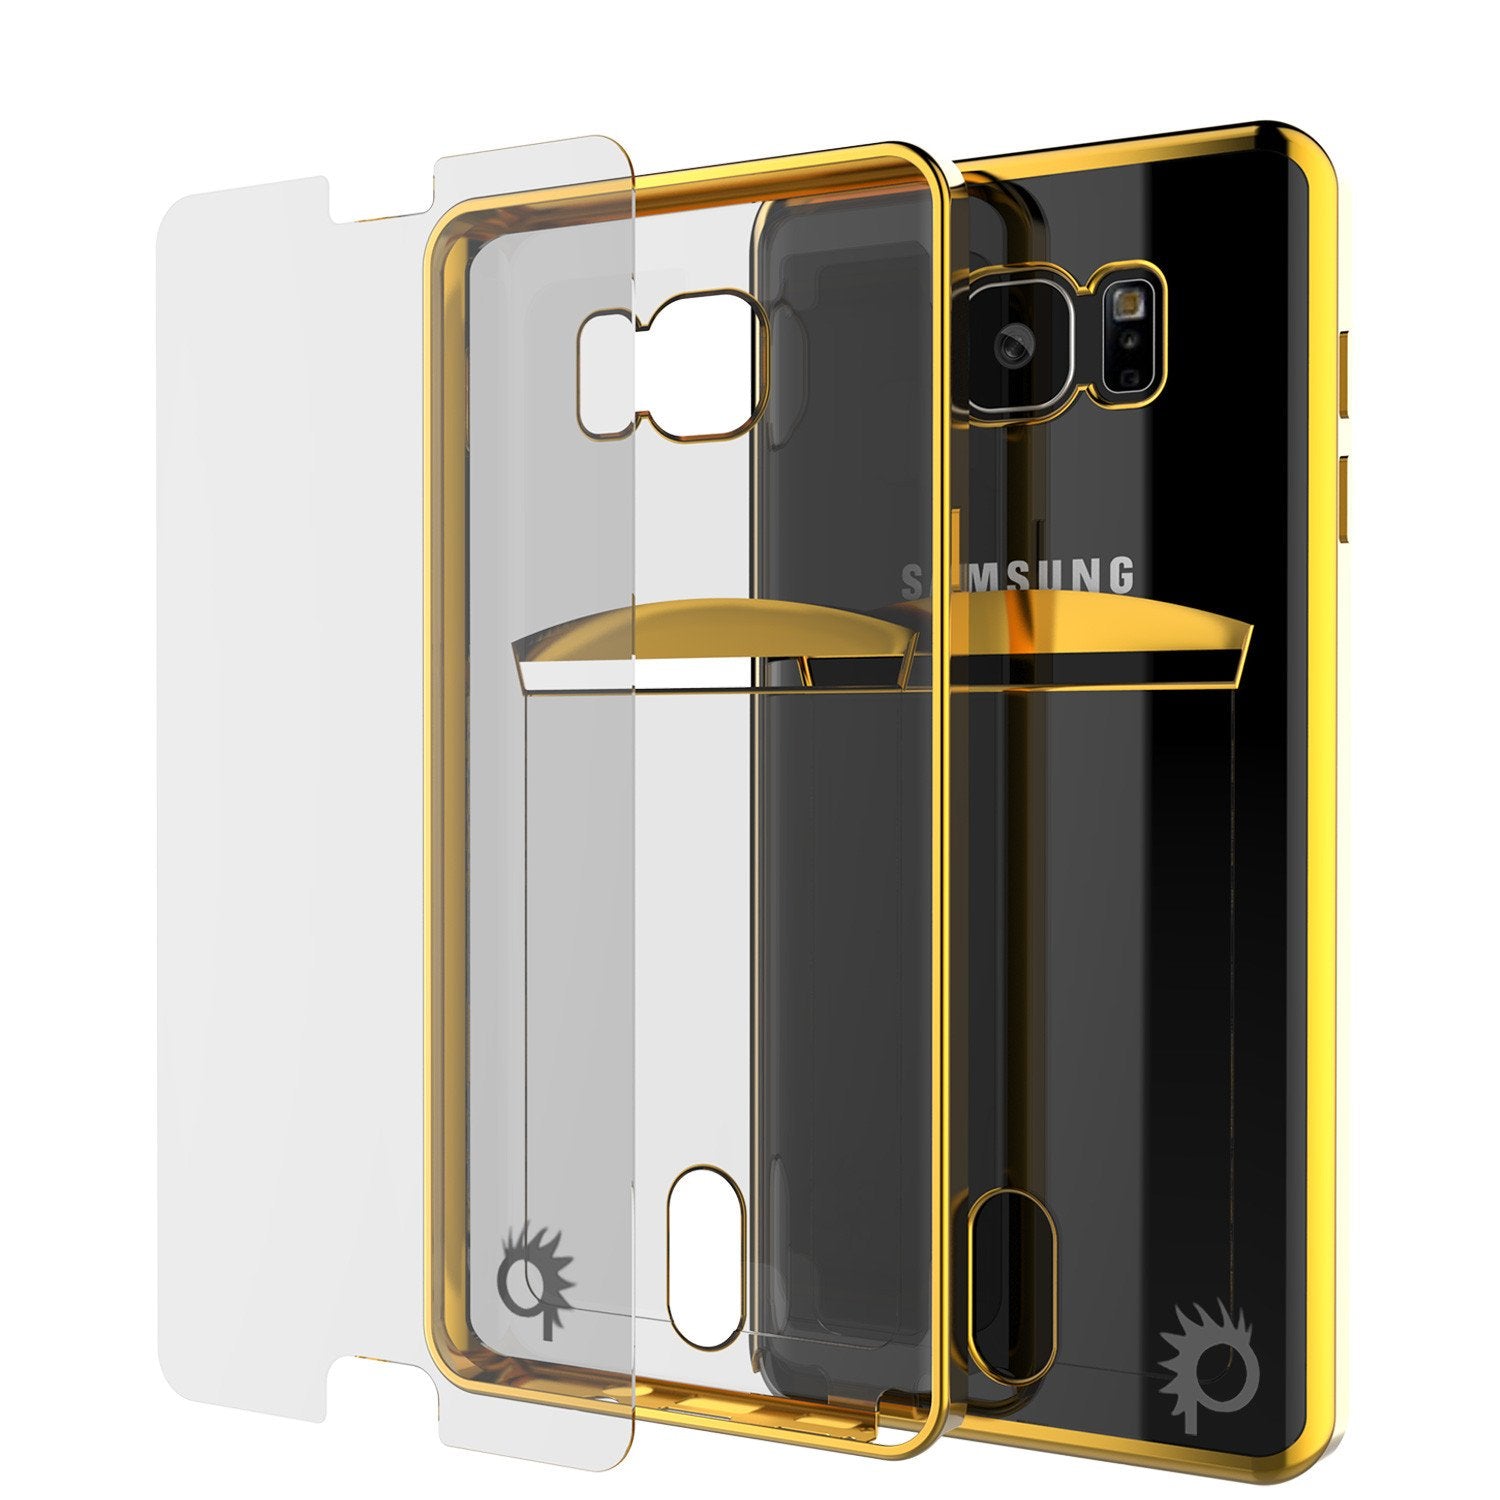 Galaxy Note 5 Case, PUNKCASE® LUCID Gold Series | Card Slot | SHIELD Screen Protector | Ultra fit